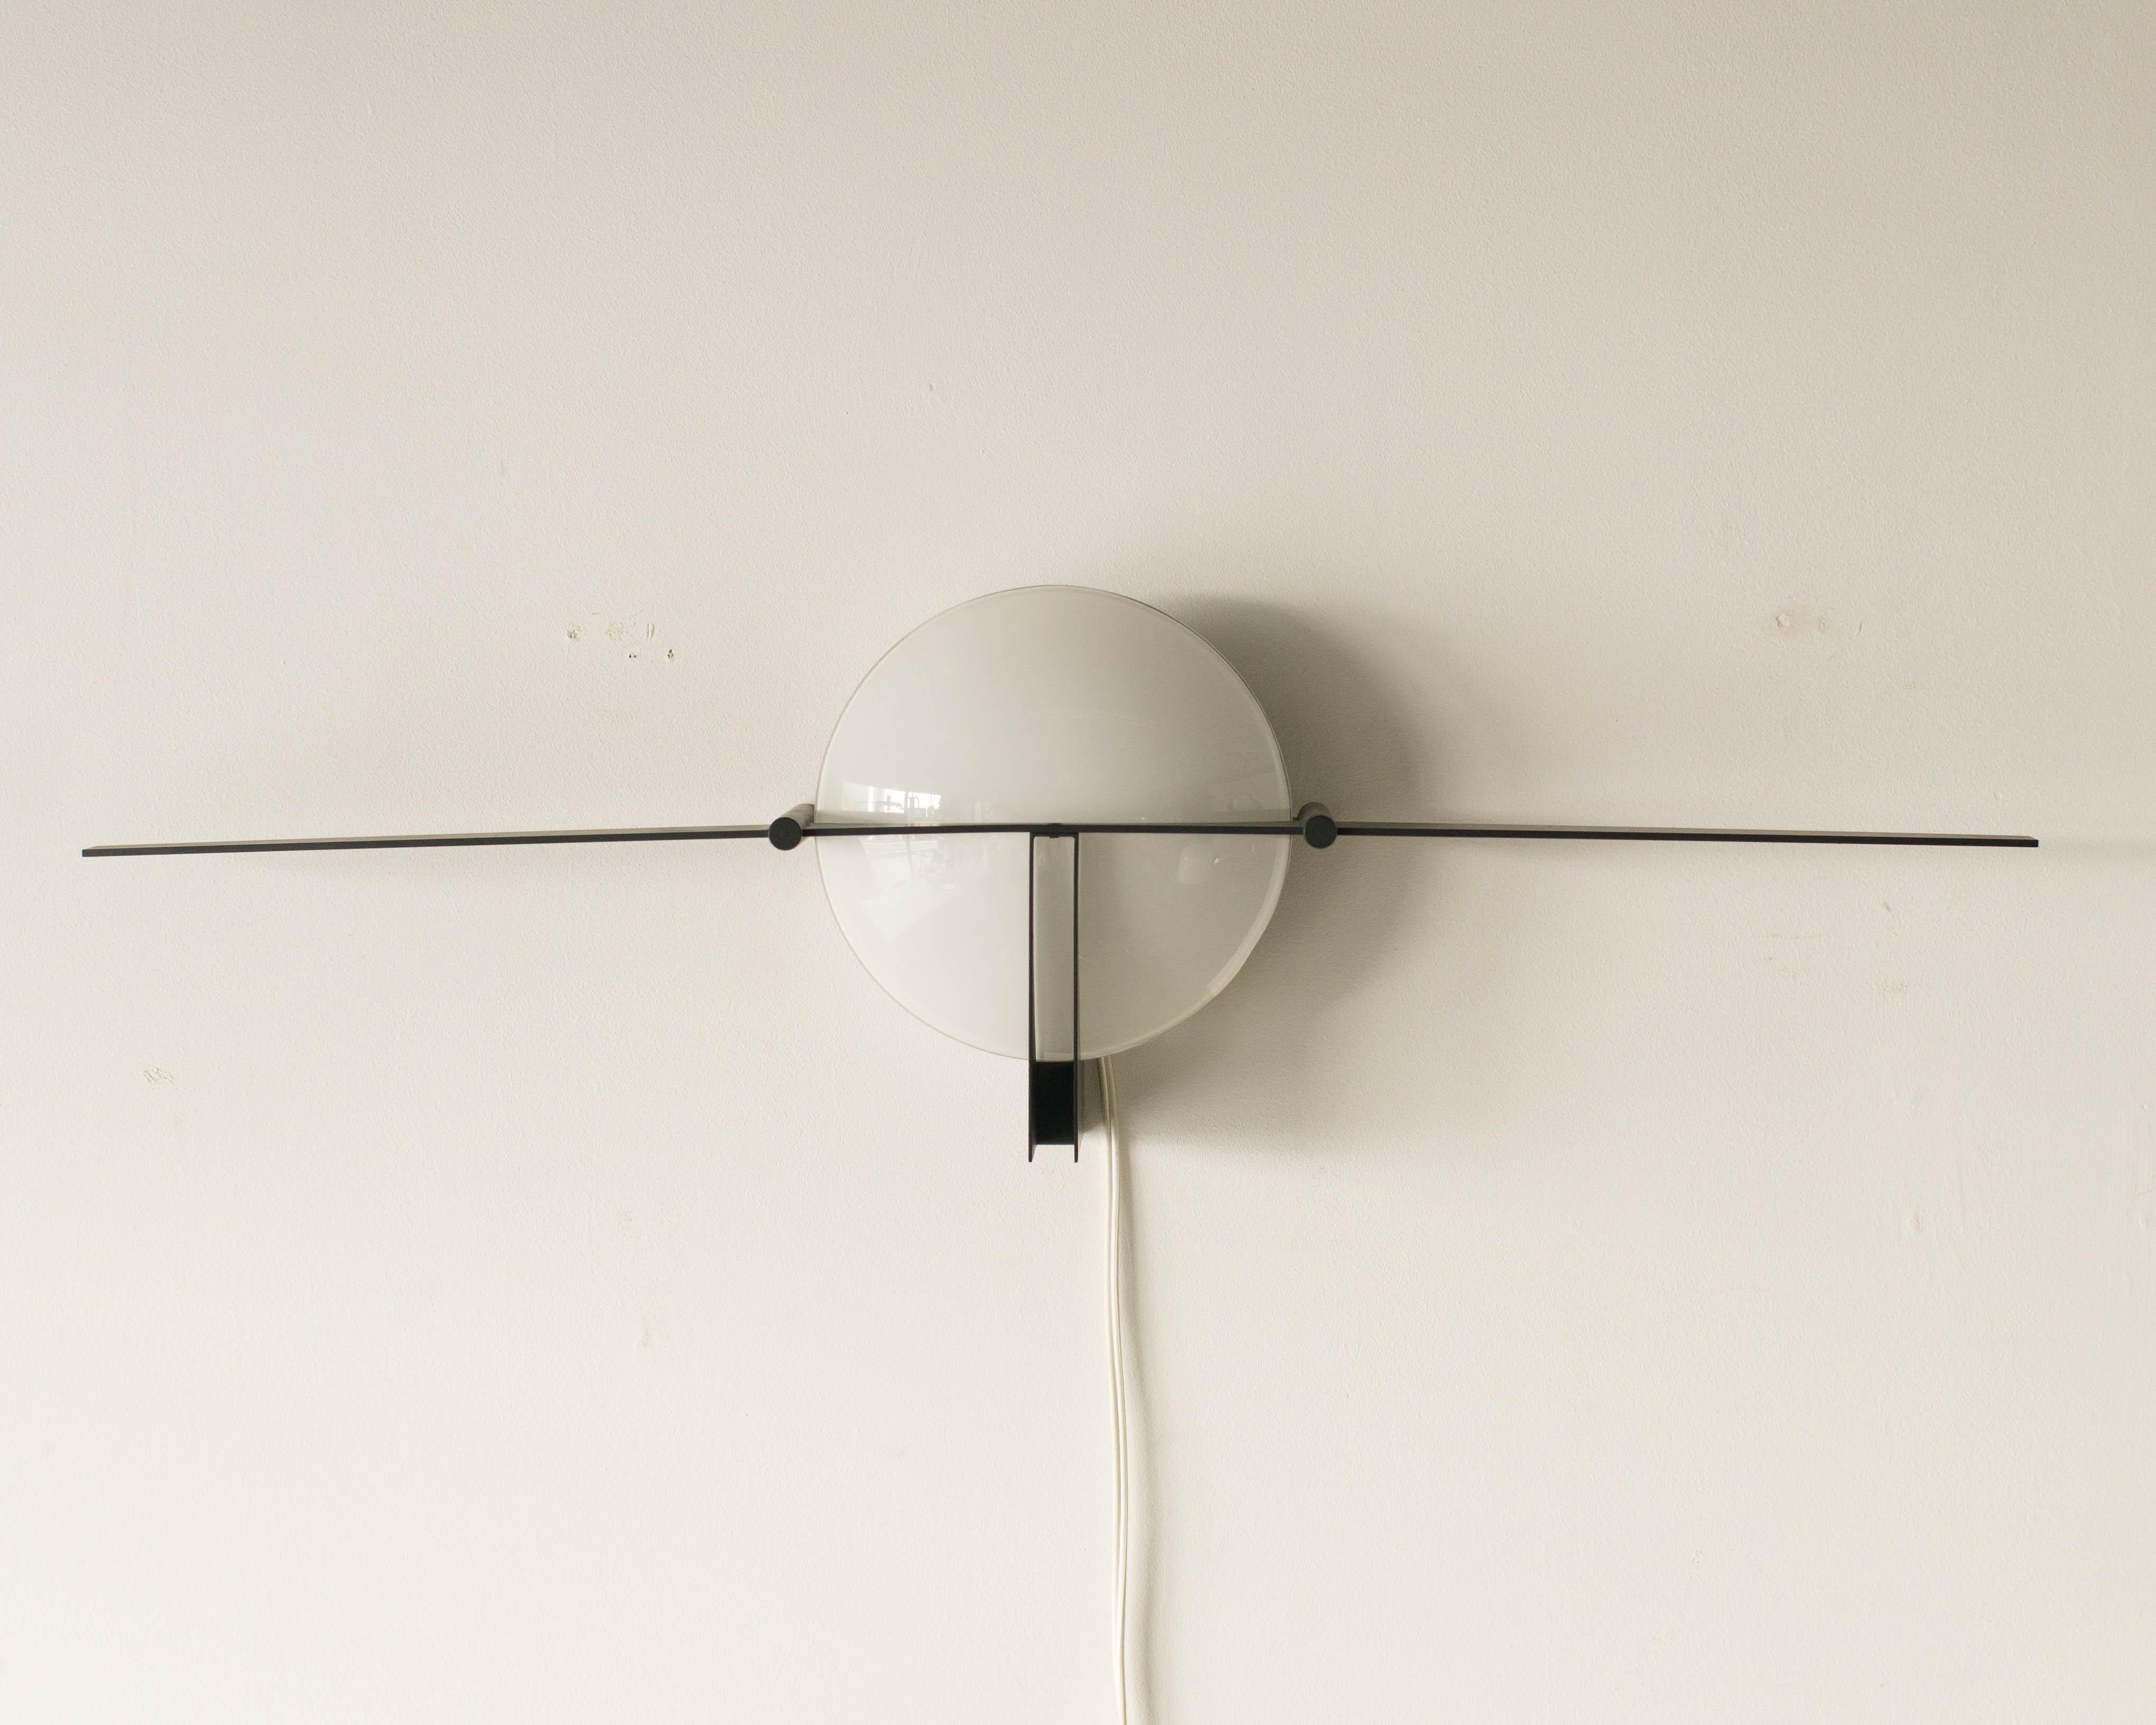 Wall lamp by Jean Michel Wilmotte. Probably made in 1980s or early 1990s.
Steel frame with white glass shade.